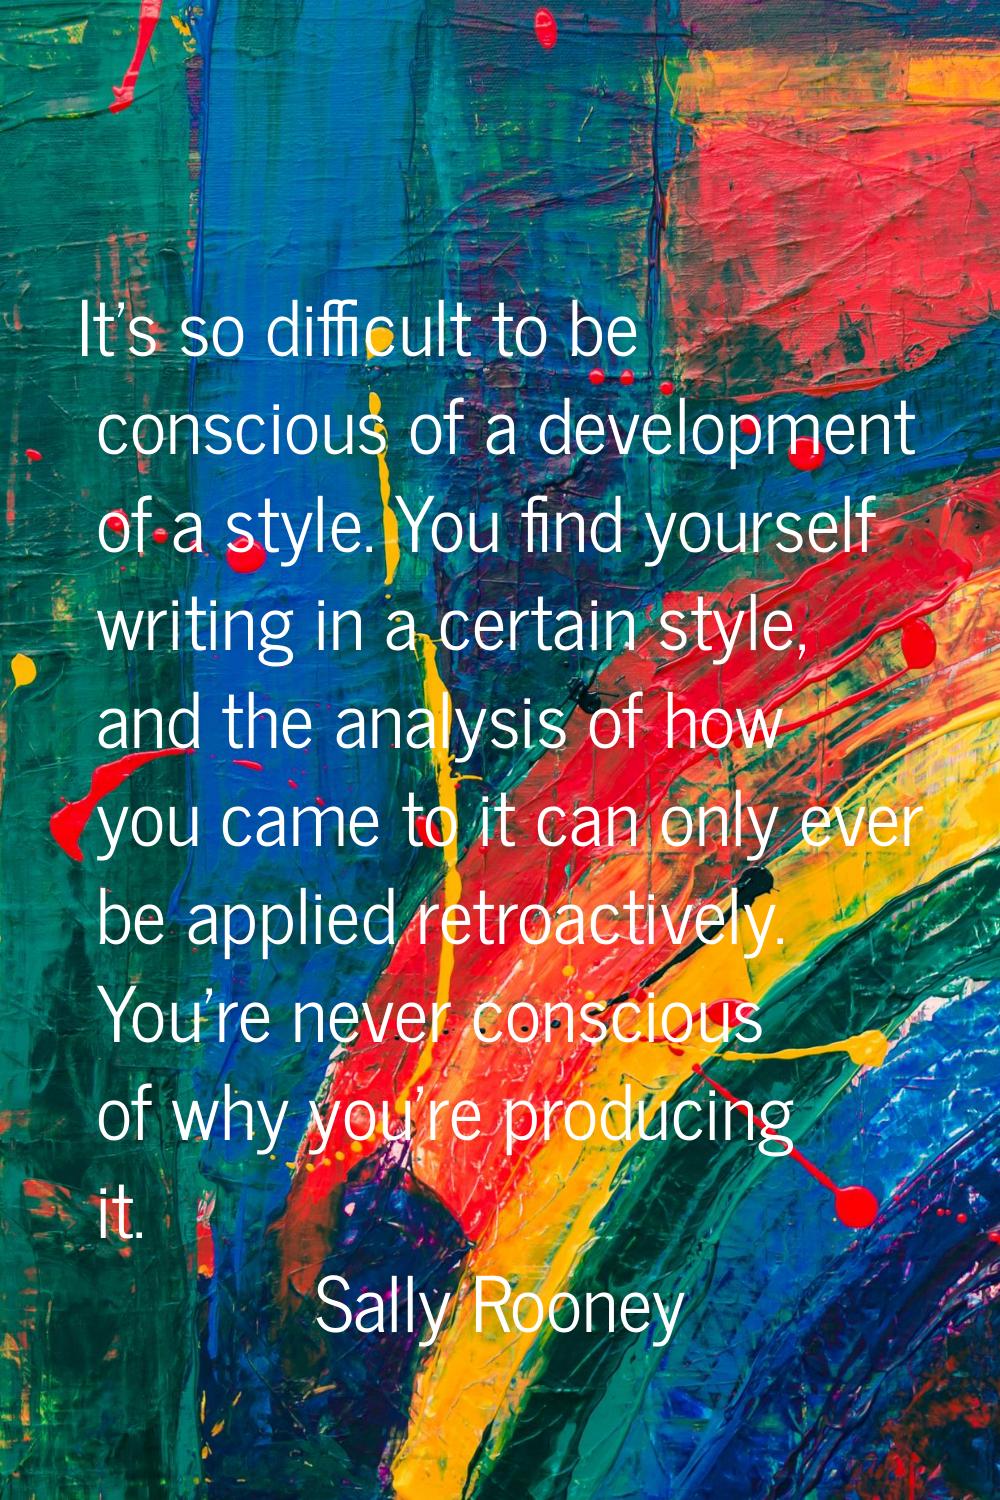 It's so difficult to be conscious of a development of a style. You find yourself writing in a certa